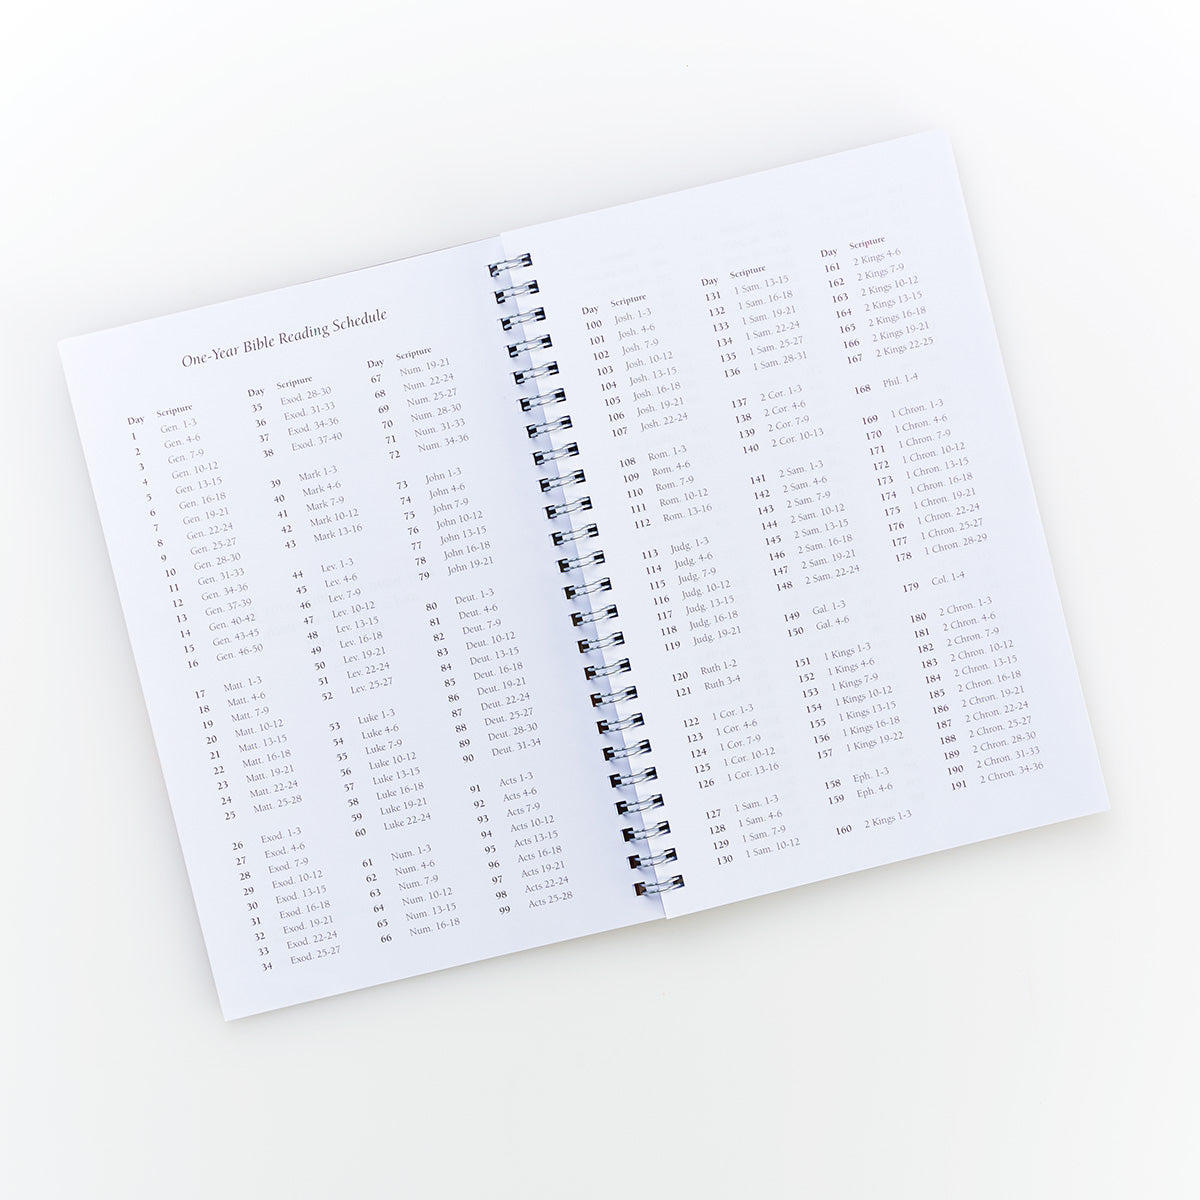 My Sermon Notes Wirebound Notebook - The Christian Gift Company